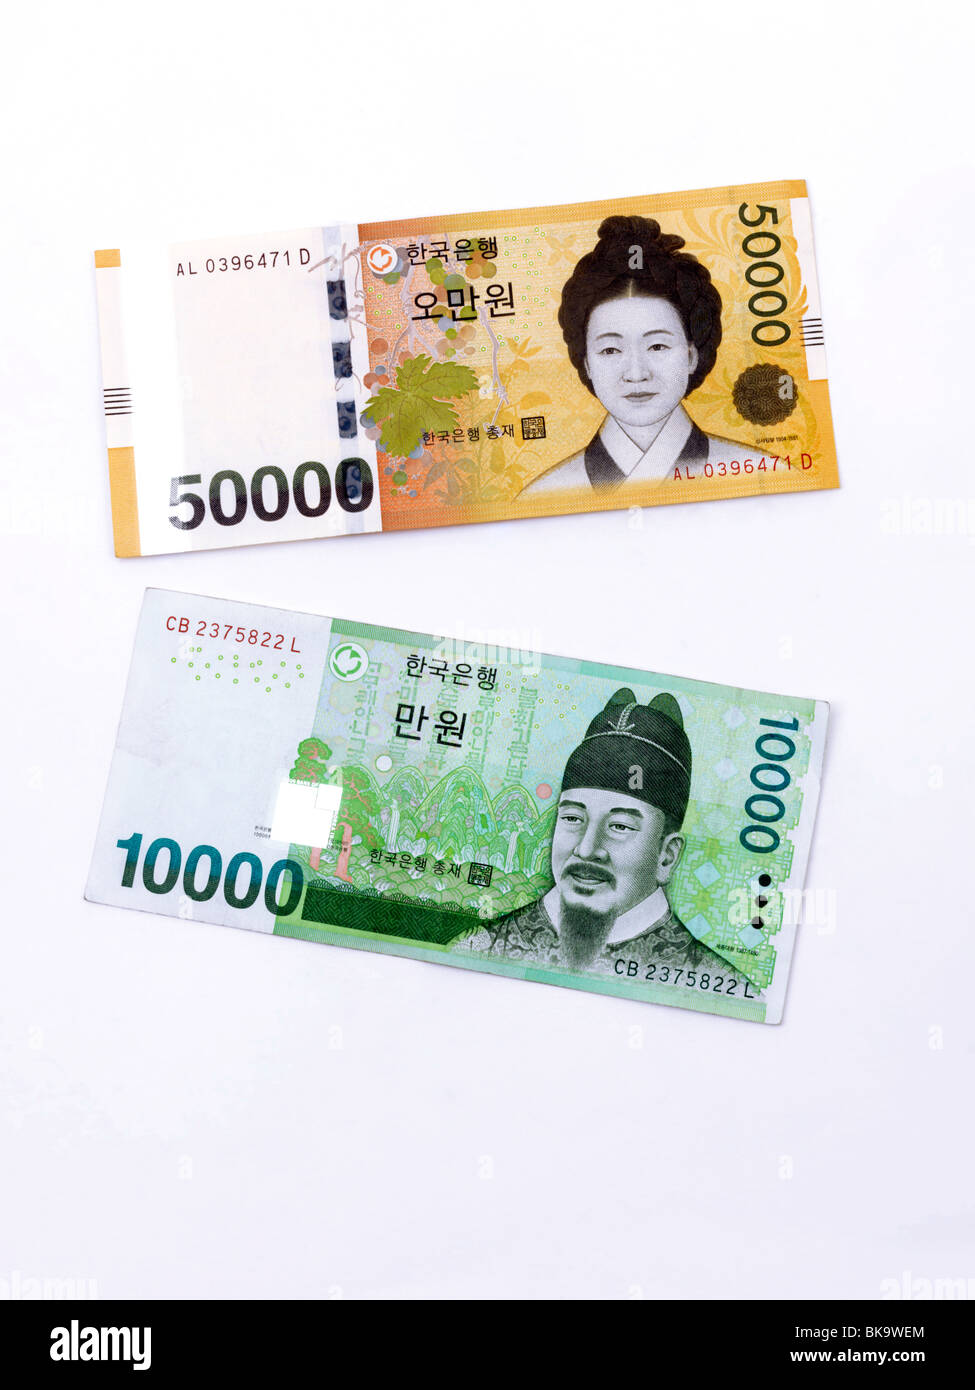 South Korean Banknotes Yi L Ojukheon On 50000 Won Note And Sejong The Great Irworobongdo On The 10000 won Note Stock Photo